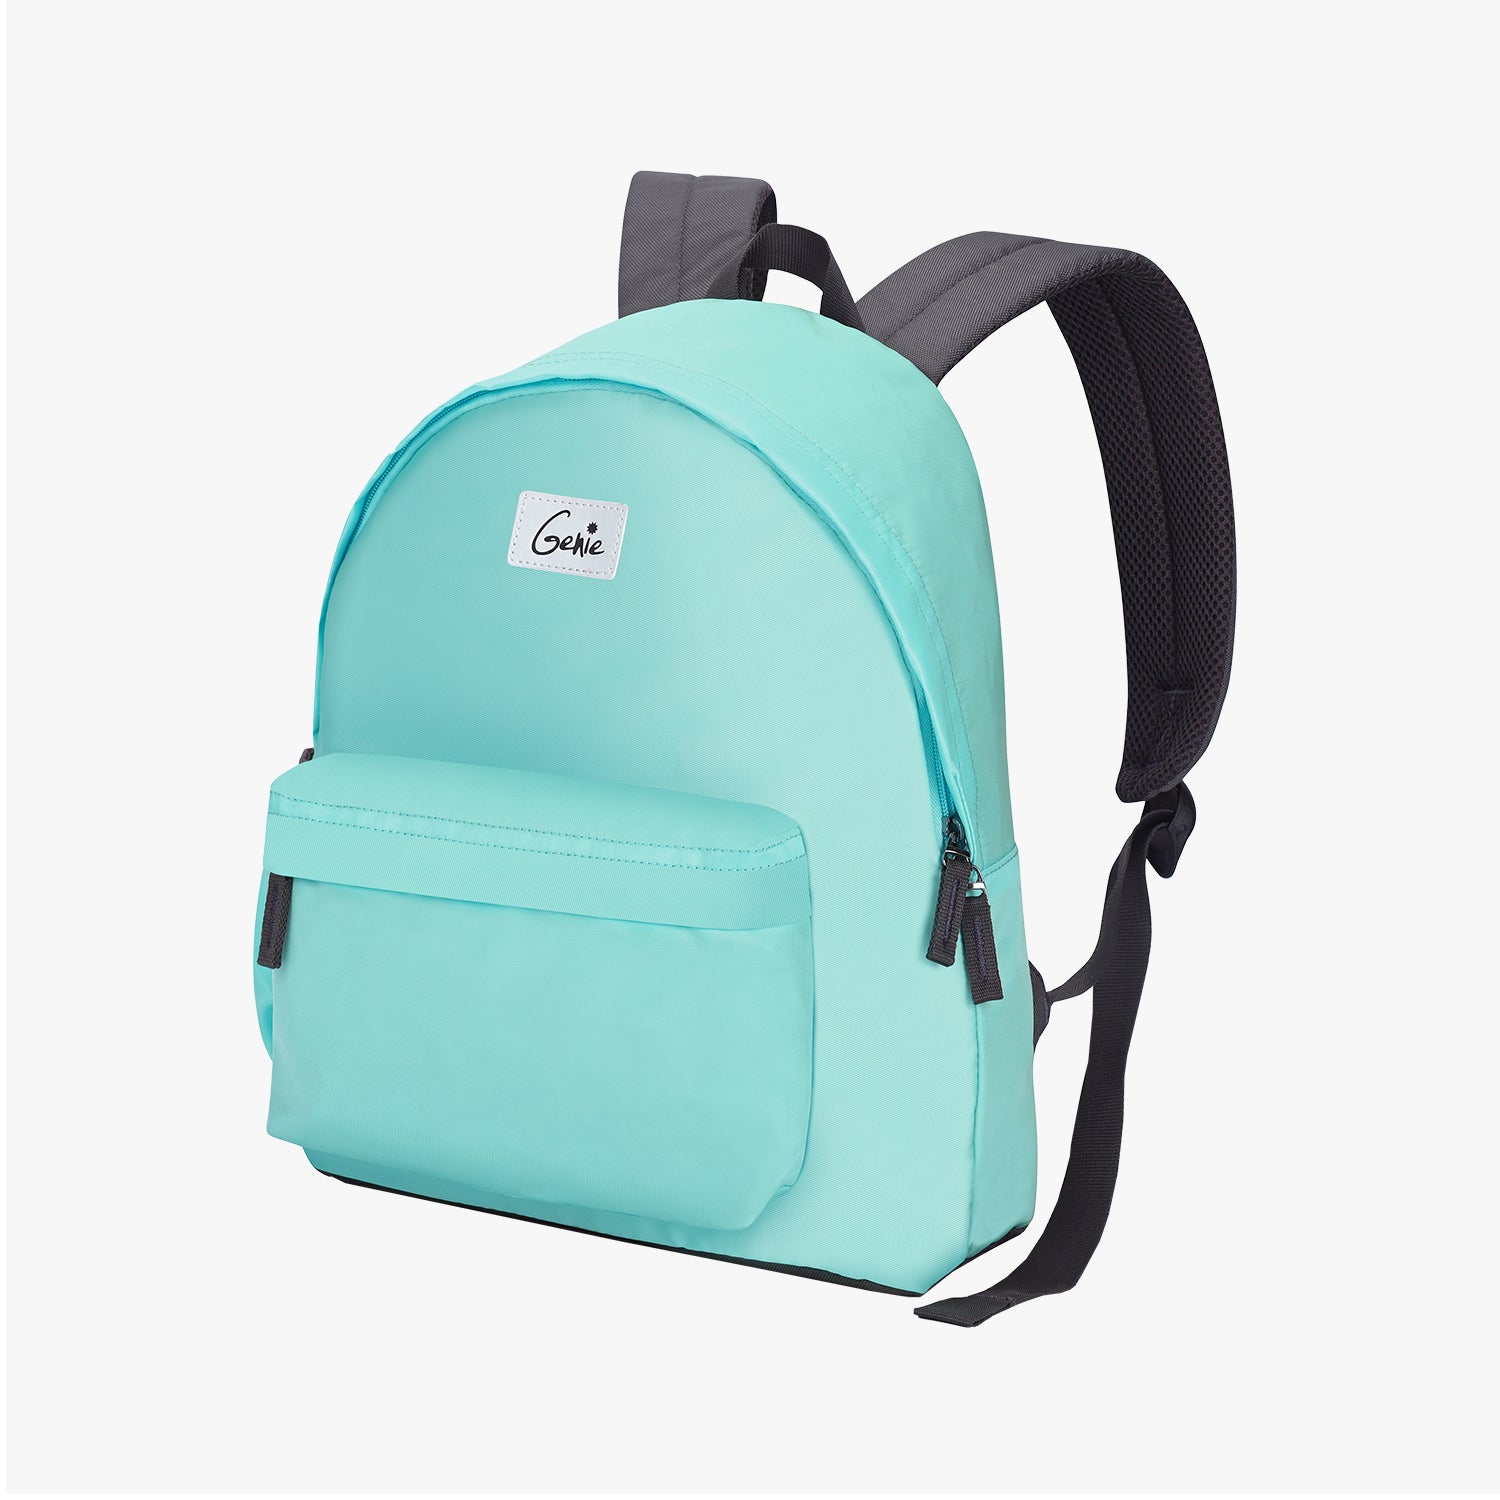 Buy Genie Candy 13.5L Spearmint Small Backpack Online